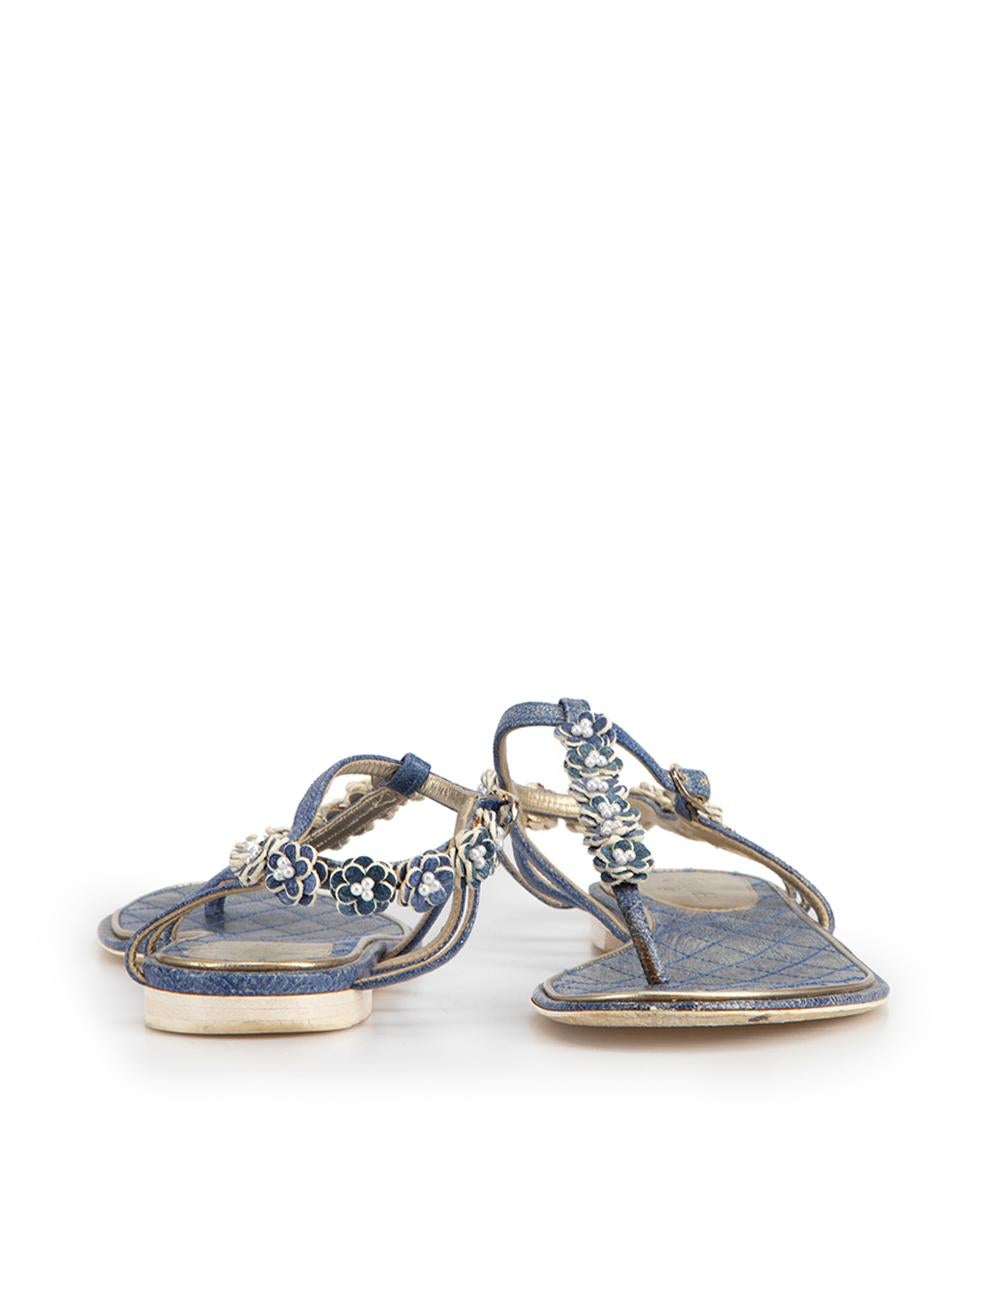 Blue Leather Denim Print Floral Accent Thong Sandals Size IT 39 In Good Condition For Sale In London, GB